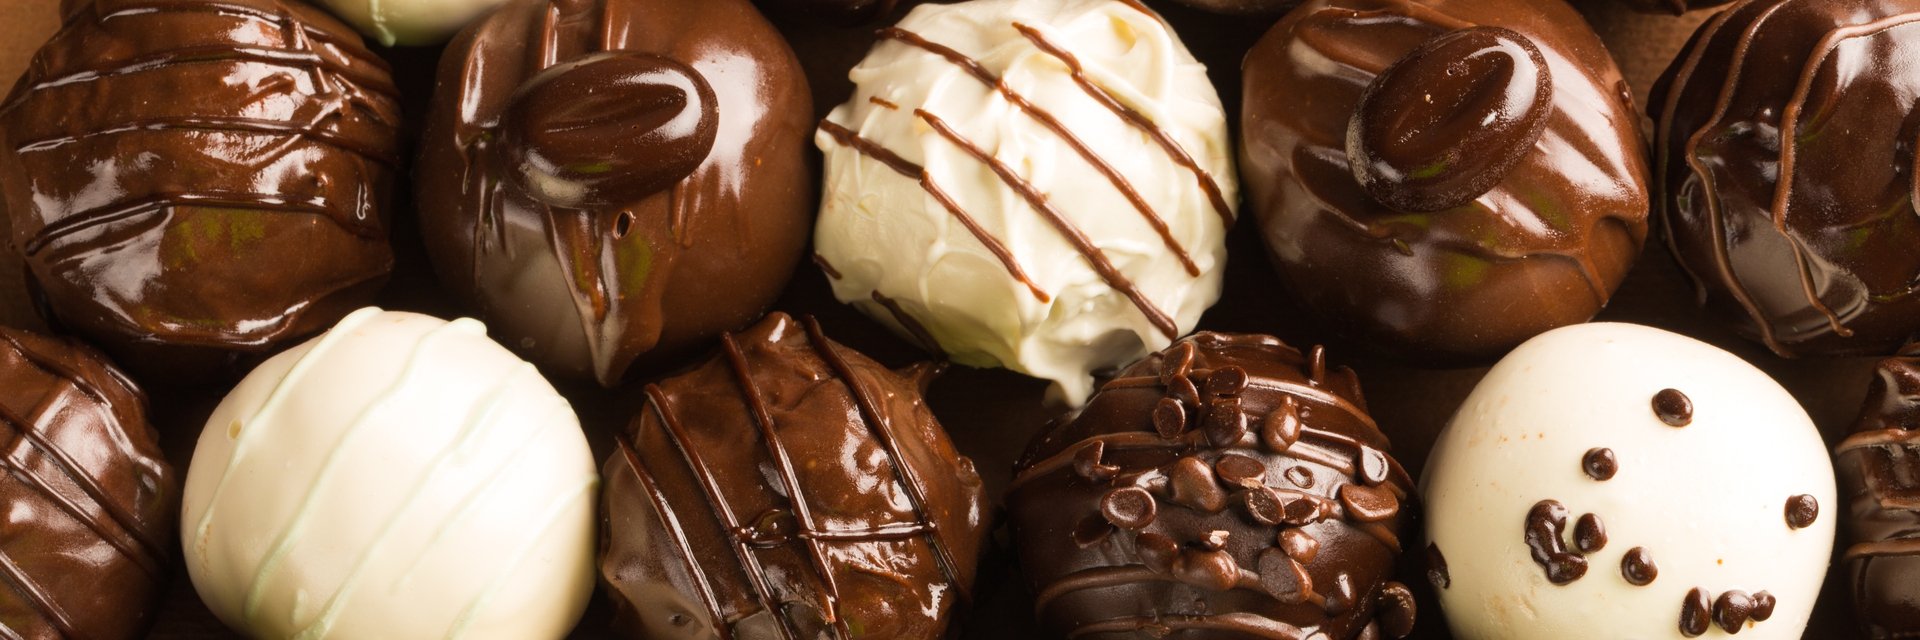 Our favourite sweet treat: chocolate.&nbsp;